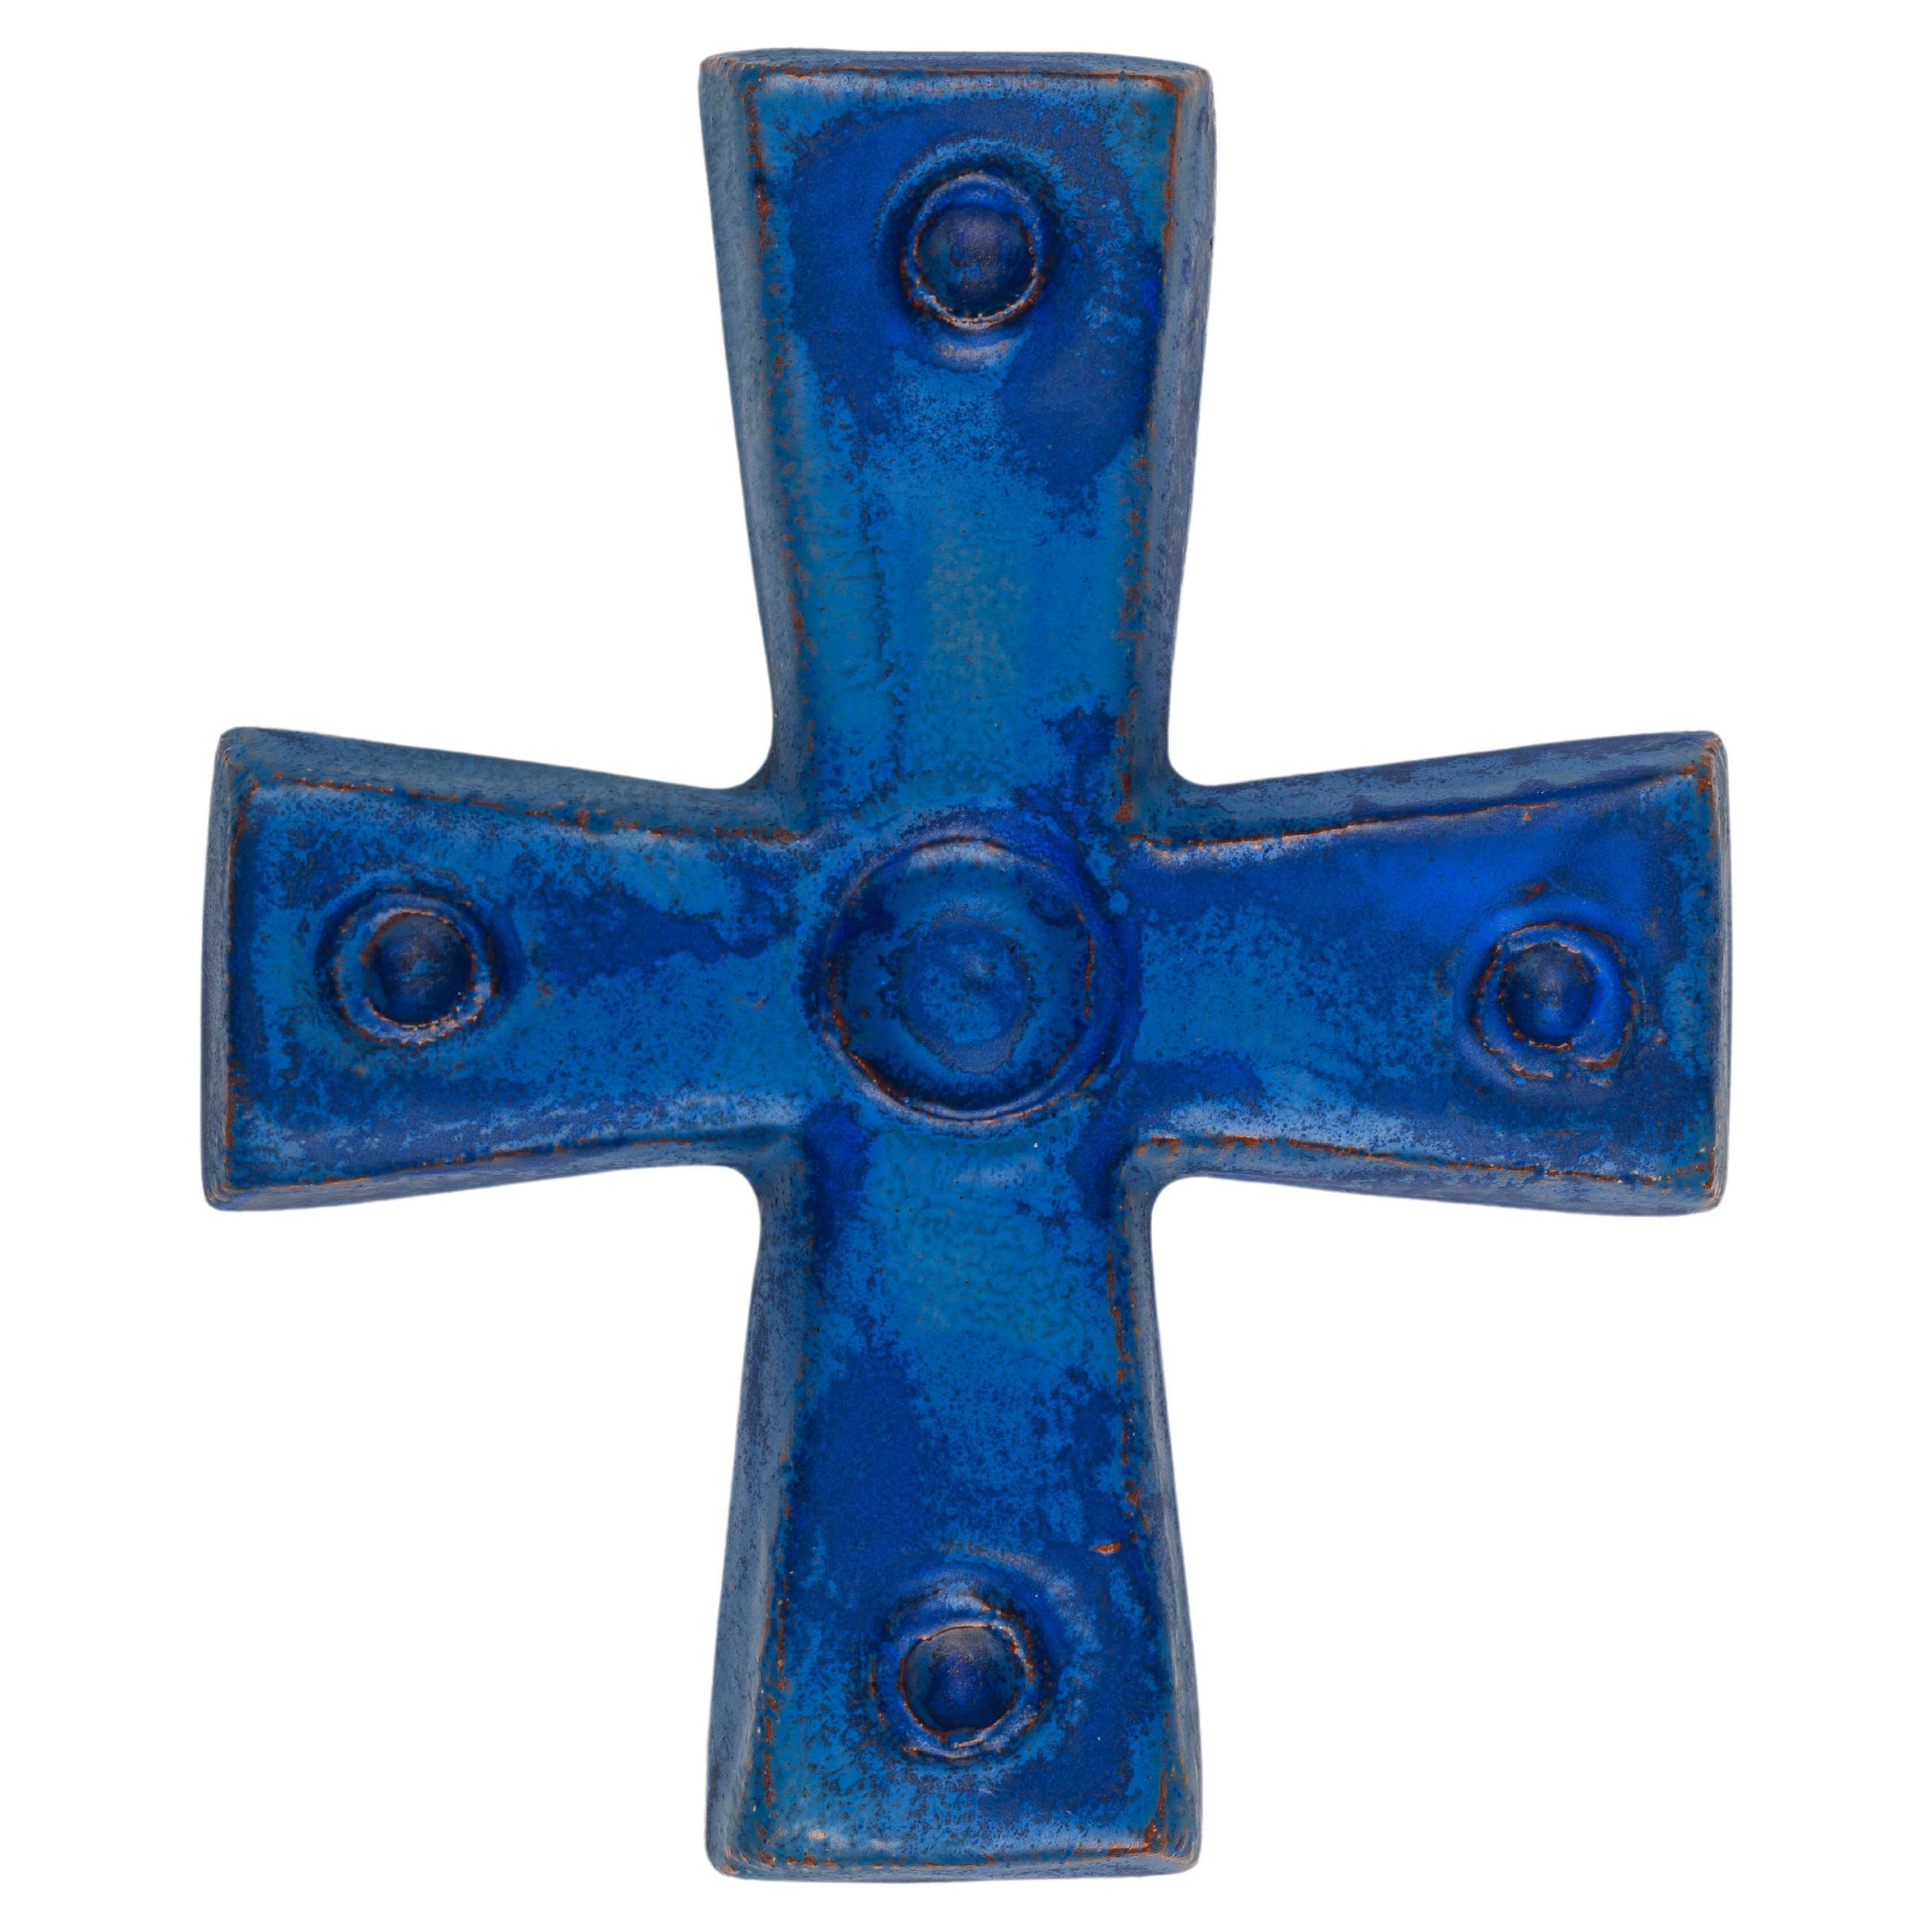 Blue Ceramic Cross with Circular Embellishments, Unique Religious Collectible For Sale